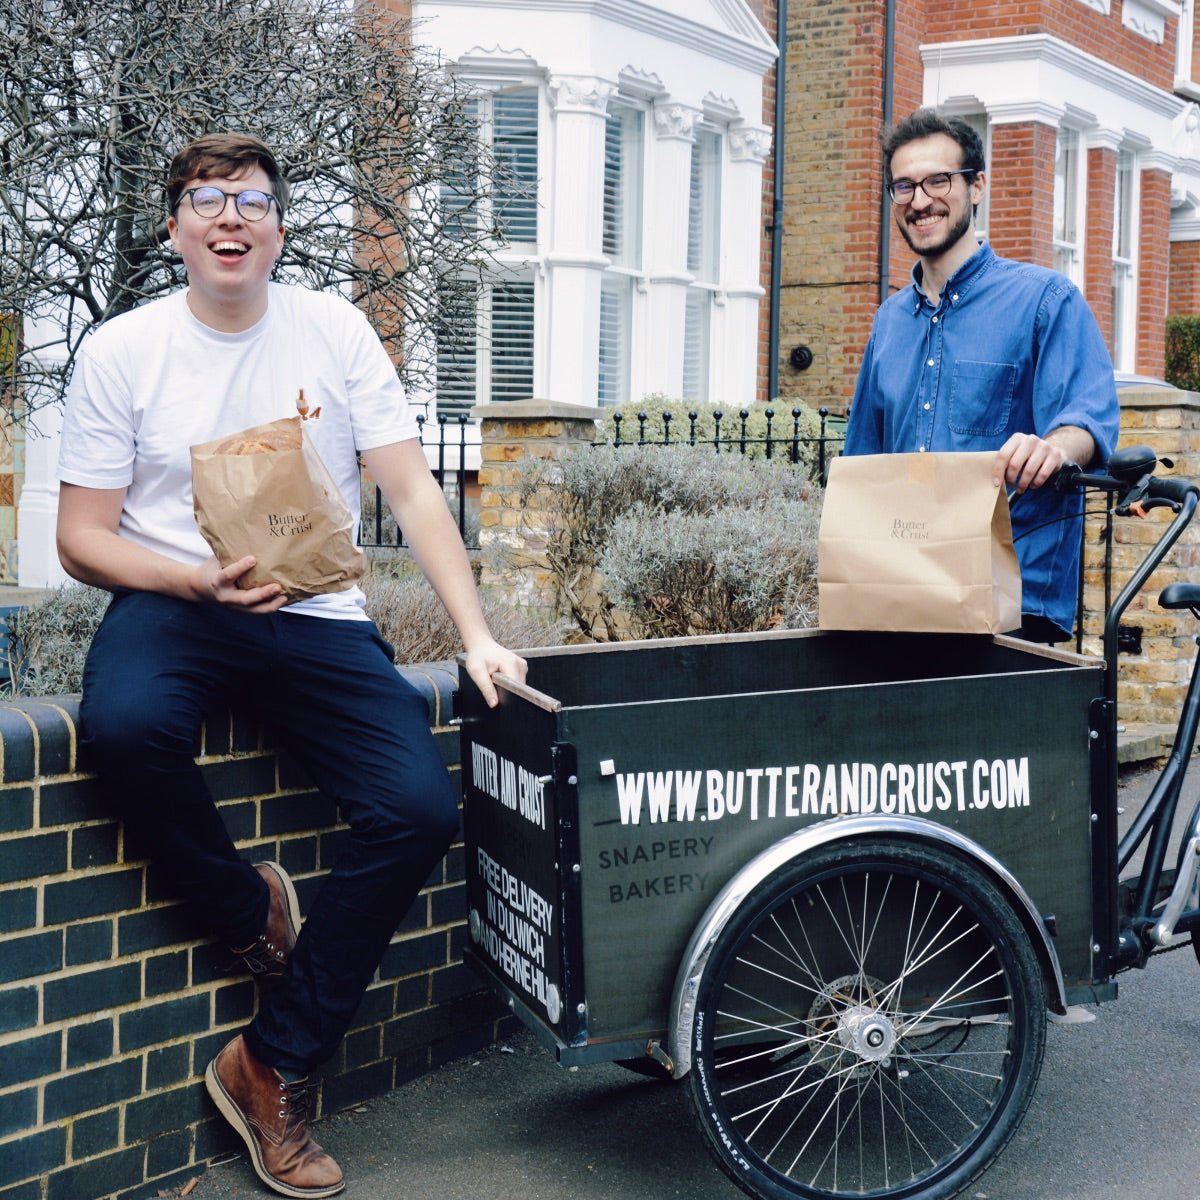 Butter & Crust co-founders Ollie (sitting on brick wall) and Nic (standing behind one of the branded Butter & Crust delivery bikes) each holding a Butter & Crust breakfast delivery bundle. 